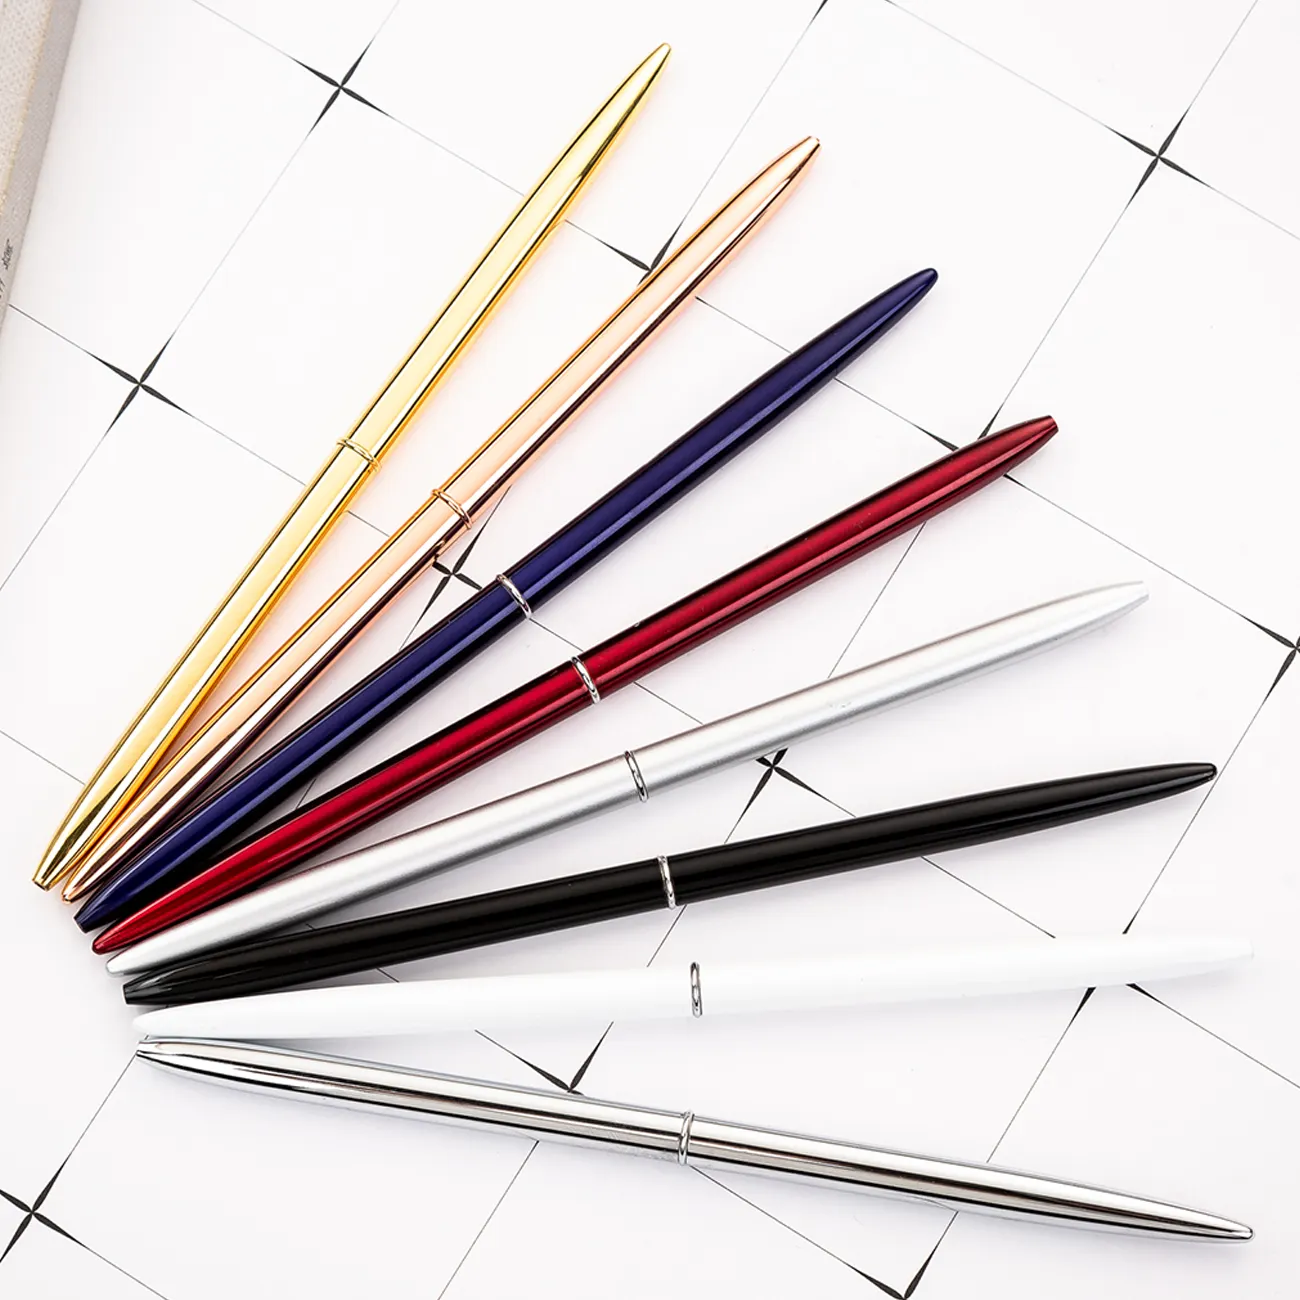 Best Selling Products Minimum Order Gifts Chrome Plated Long Metal Pen Silver Gold Rose Gold Skinny Desk Slim Hotel Pen